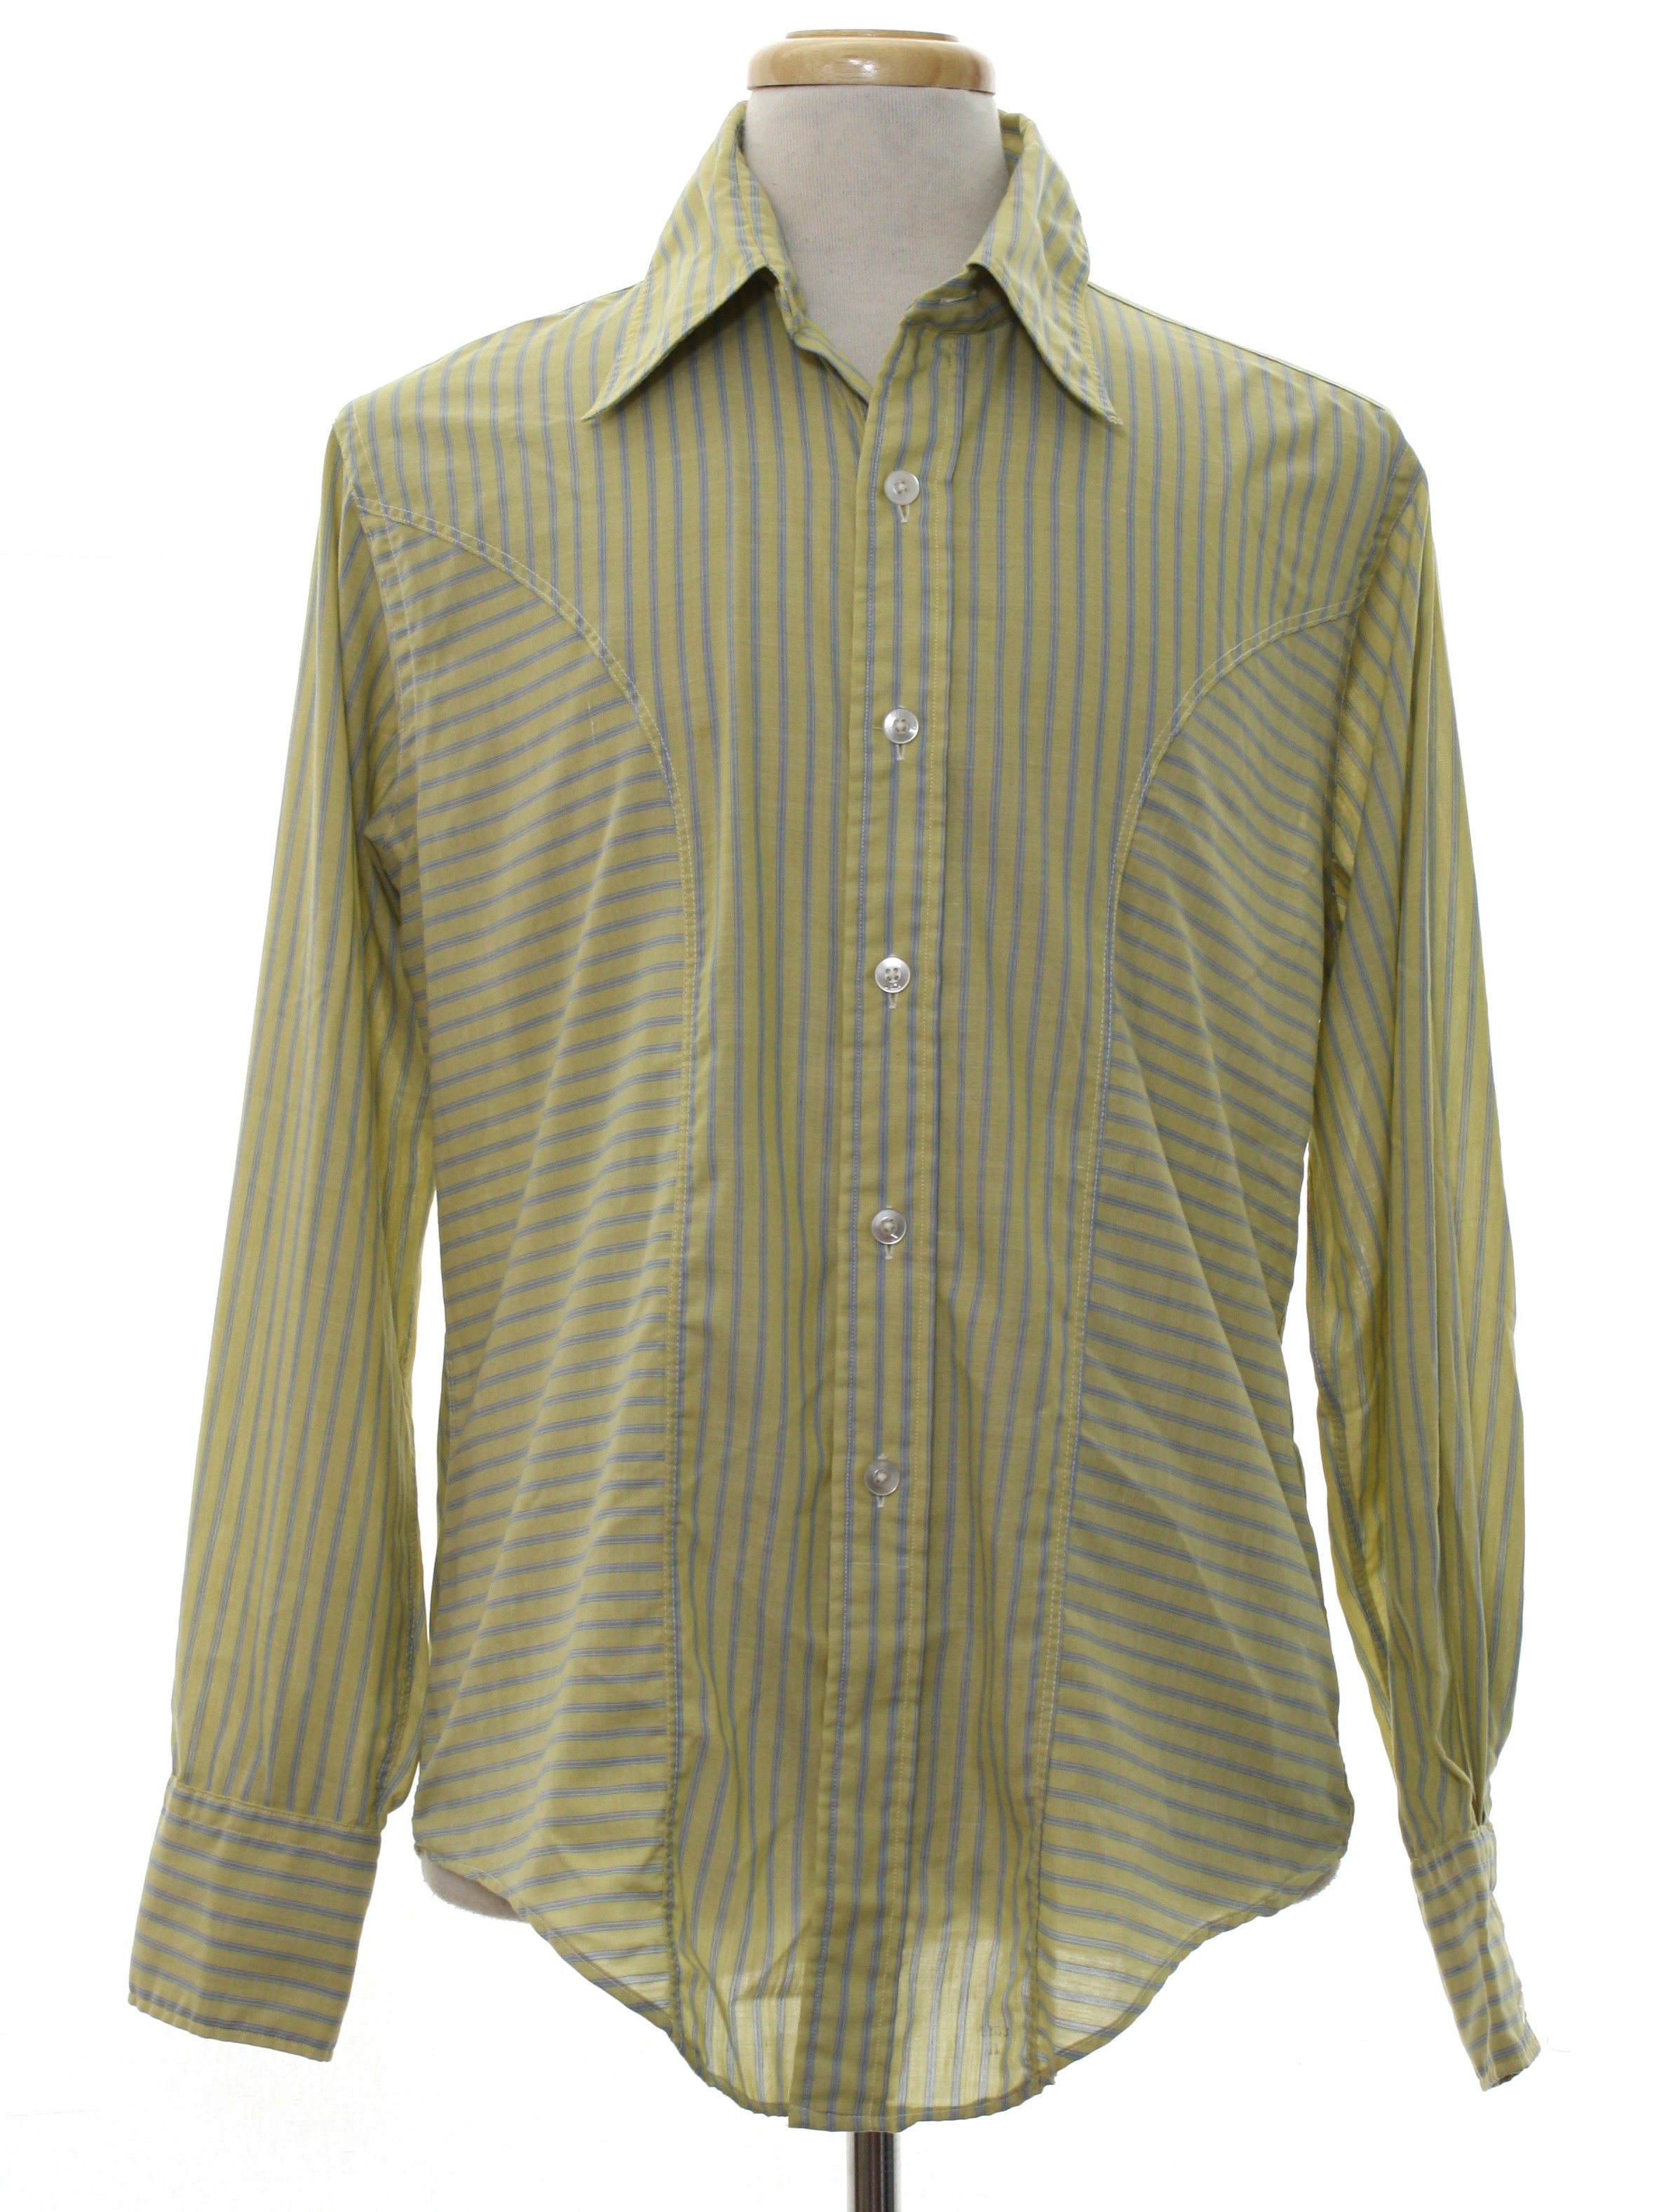 1970's Retro Shirt: 70s -The Stage- Mens light split pea green with ...